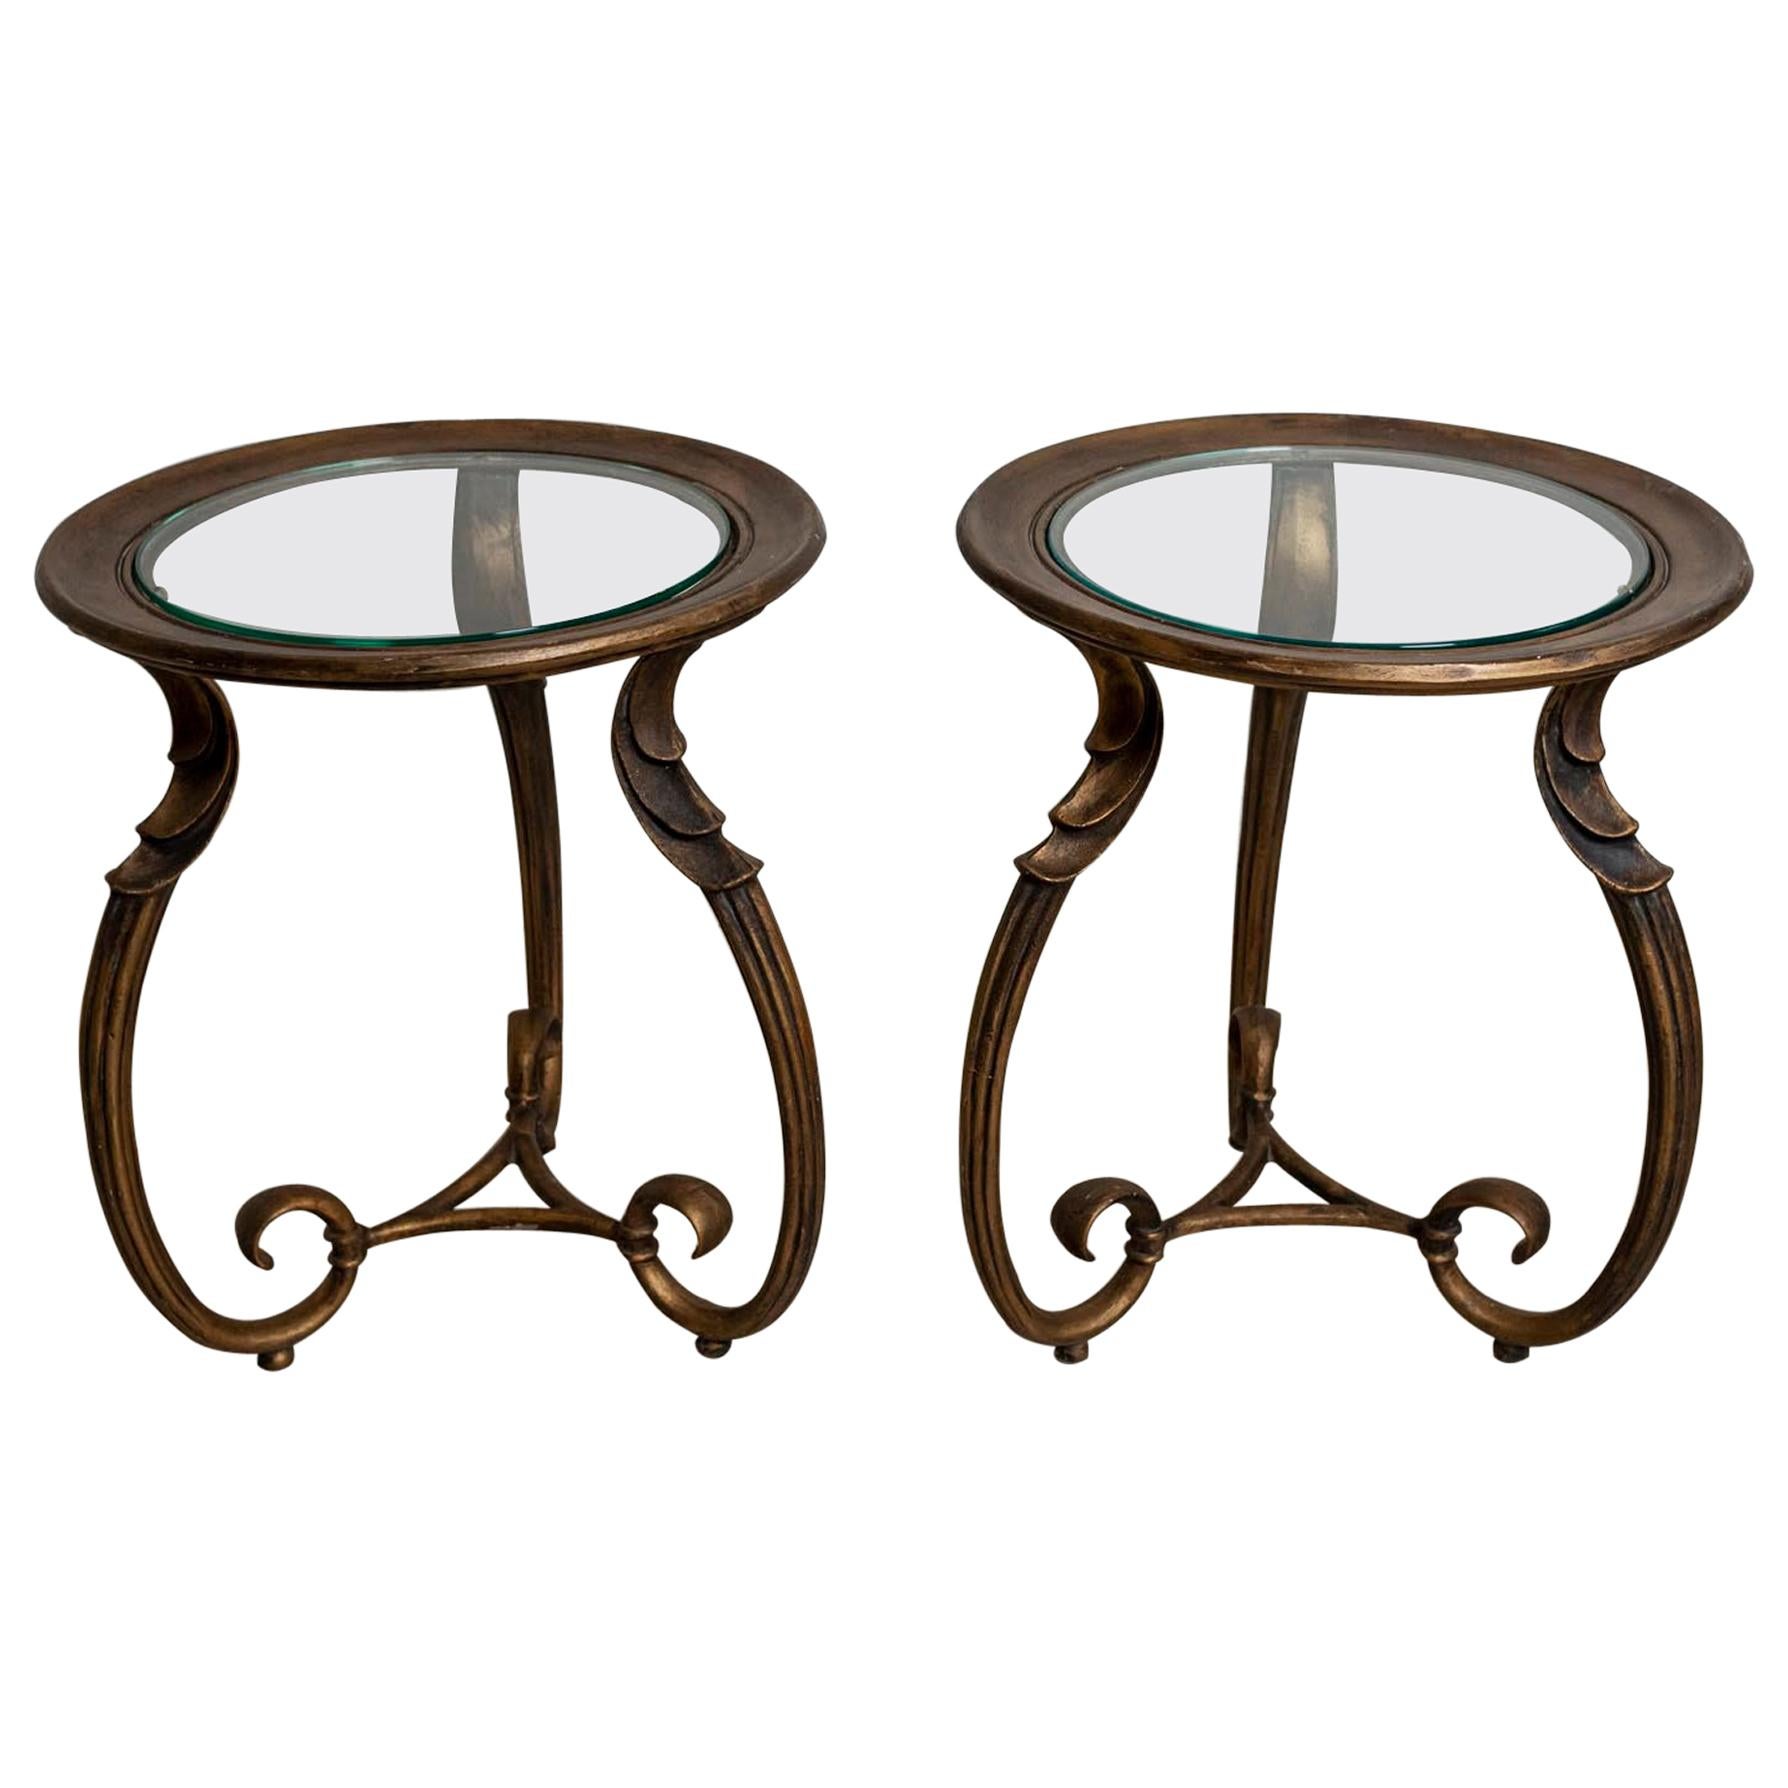 Pair of 1930s French Bronzed Scrolled Leg Side Tables with Glass Inserts